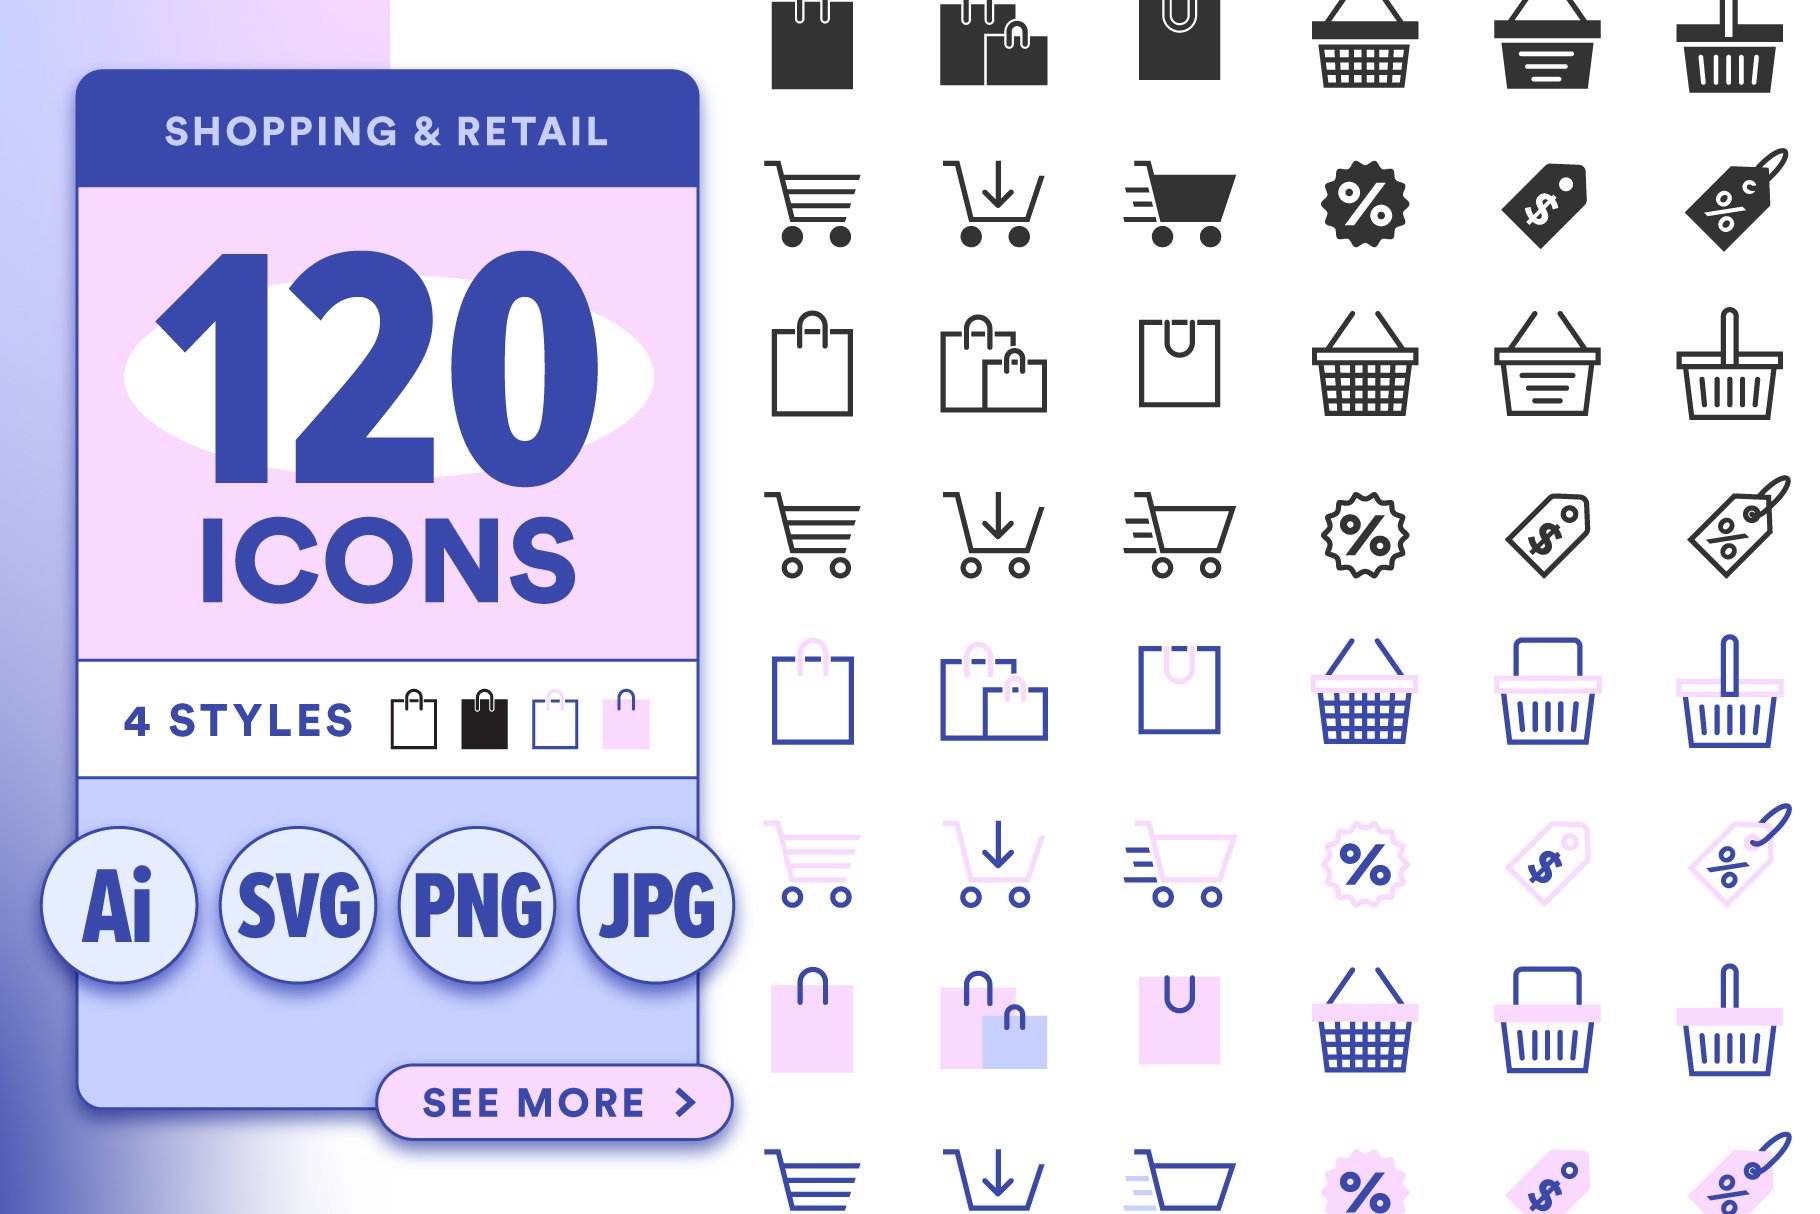 120 Minimal Shopping Icons Pack cover image.